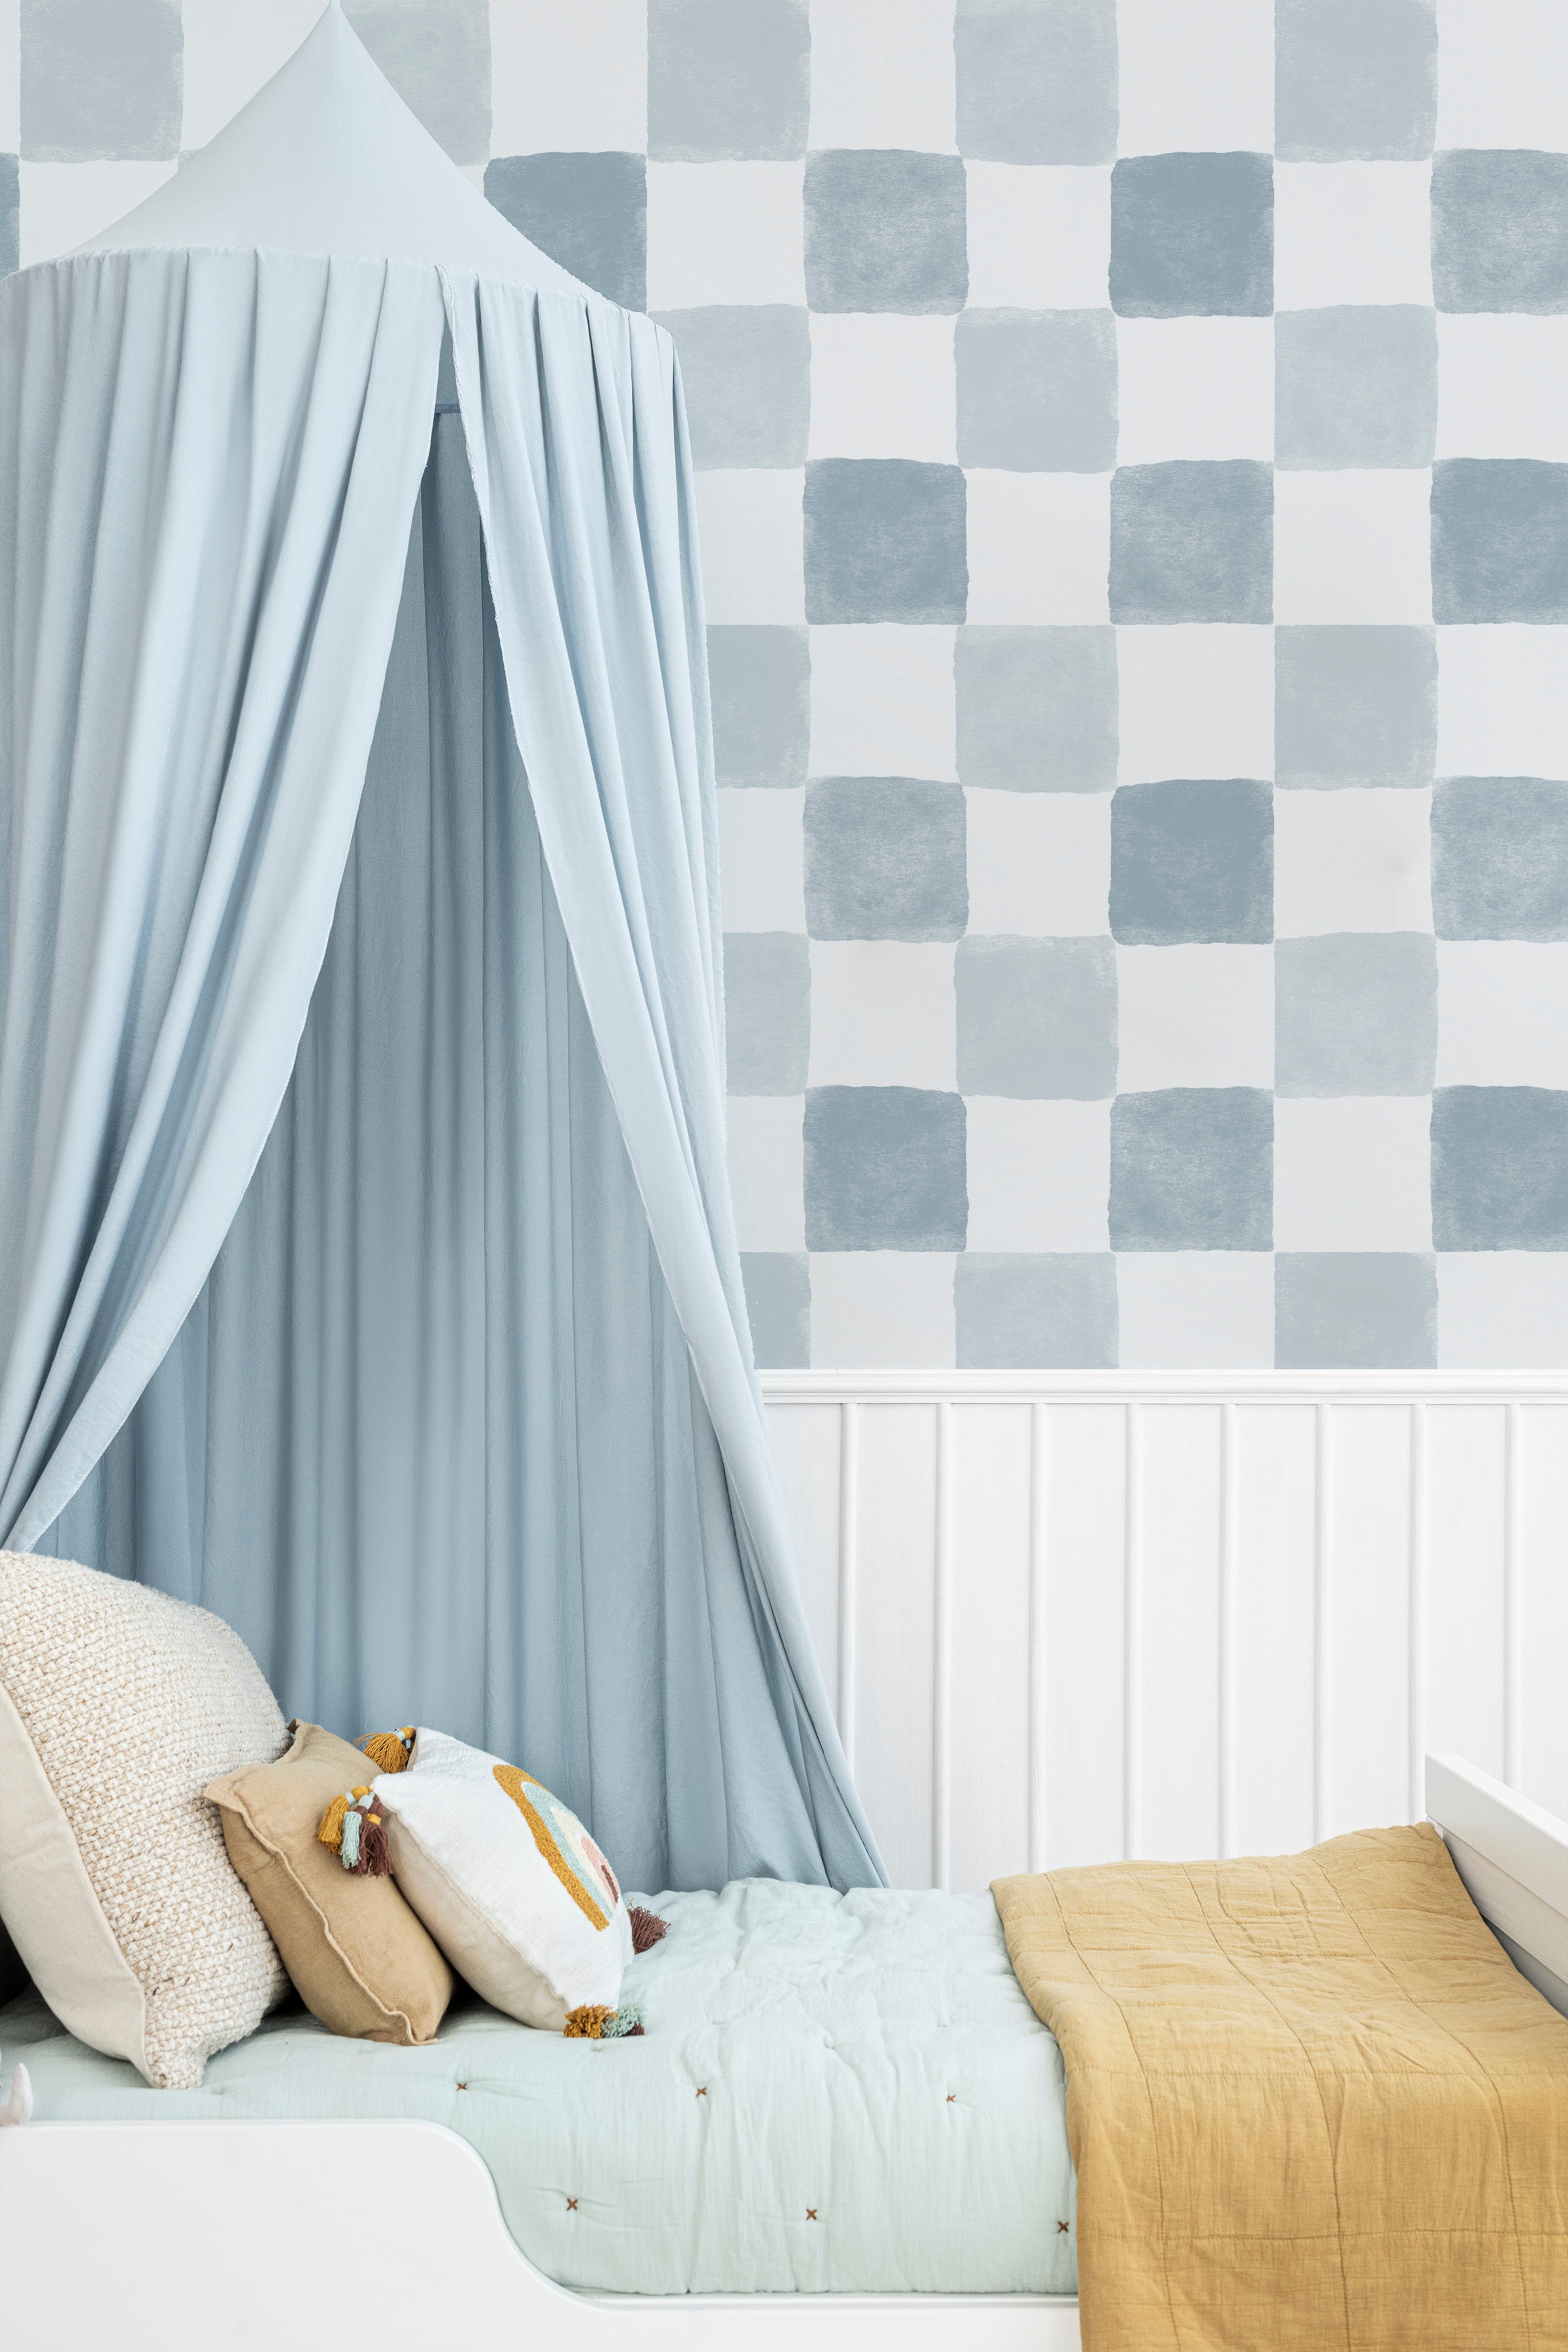 A cozy children's nook featuring Clémence Wallpaper in Pale Blue, displaying a checkered pattern with alternating soft pale blue and white squares. The space is accented with a whimsical blue canopy draped over a bed, complemented by plush pillows and a mustard blanket.